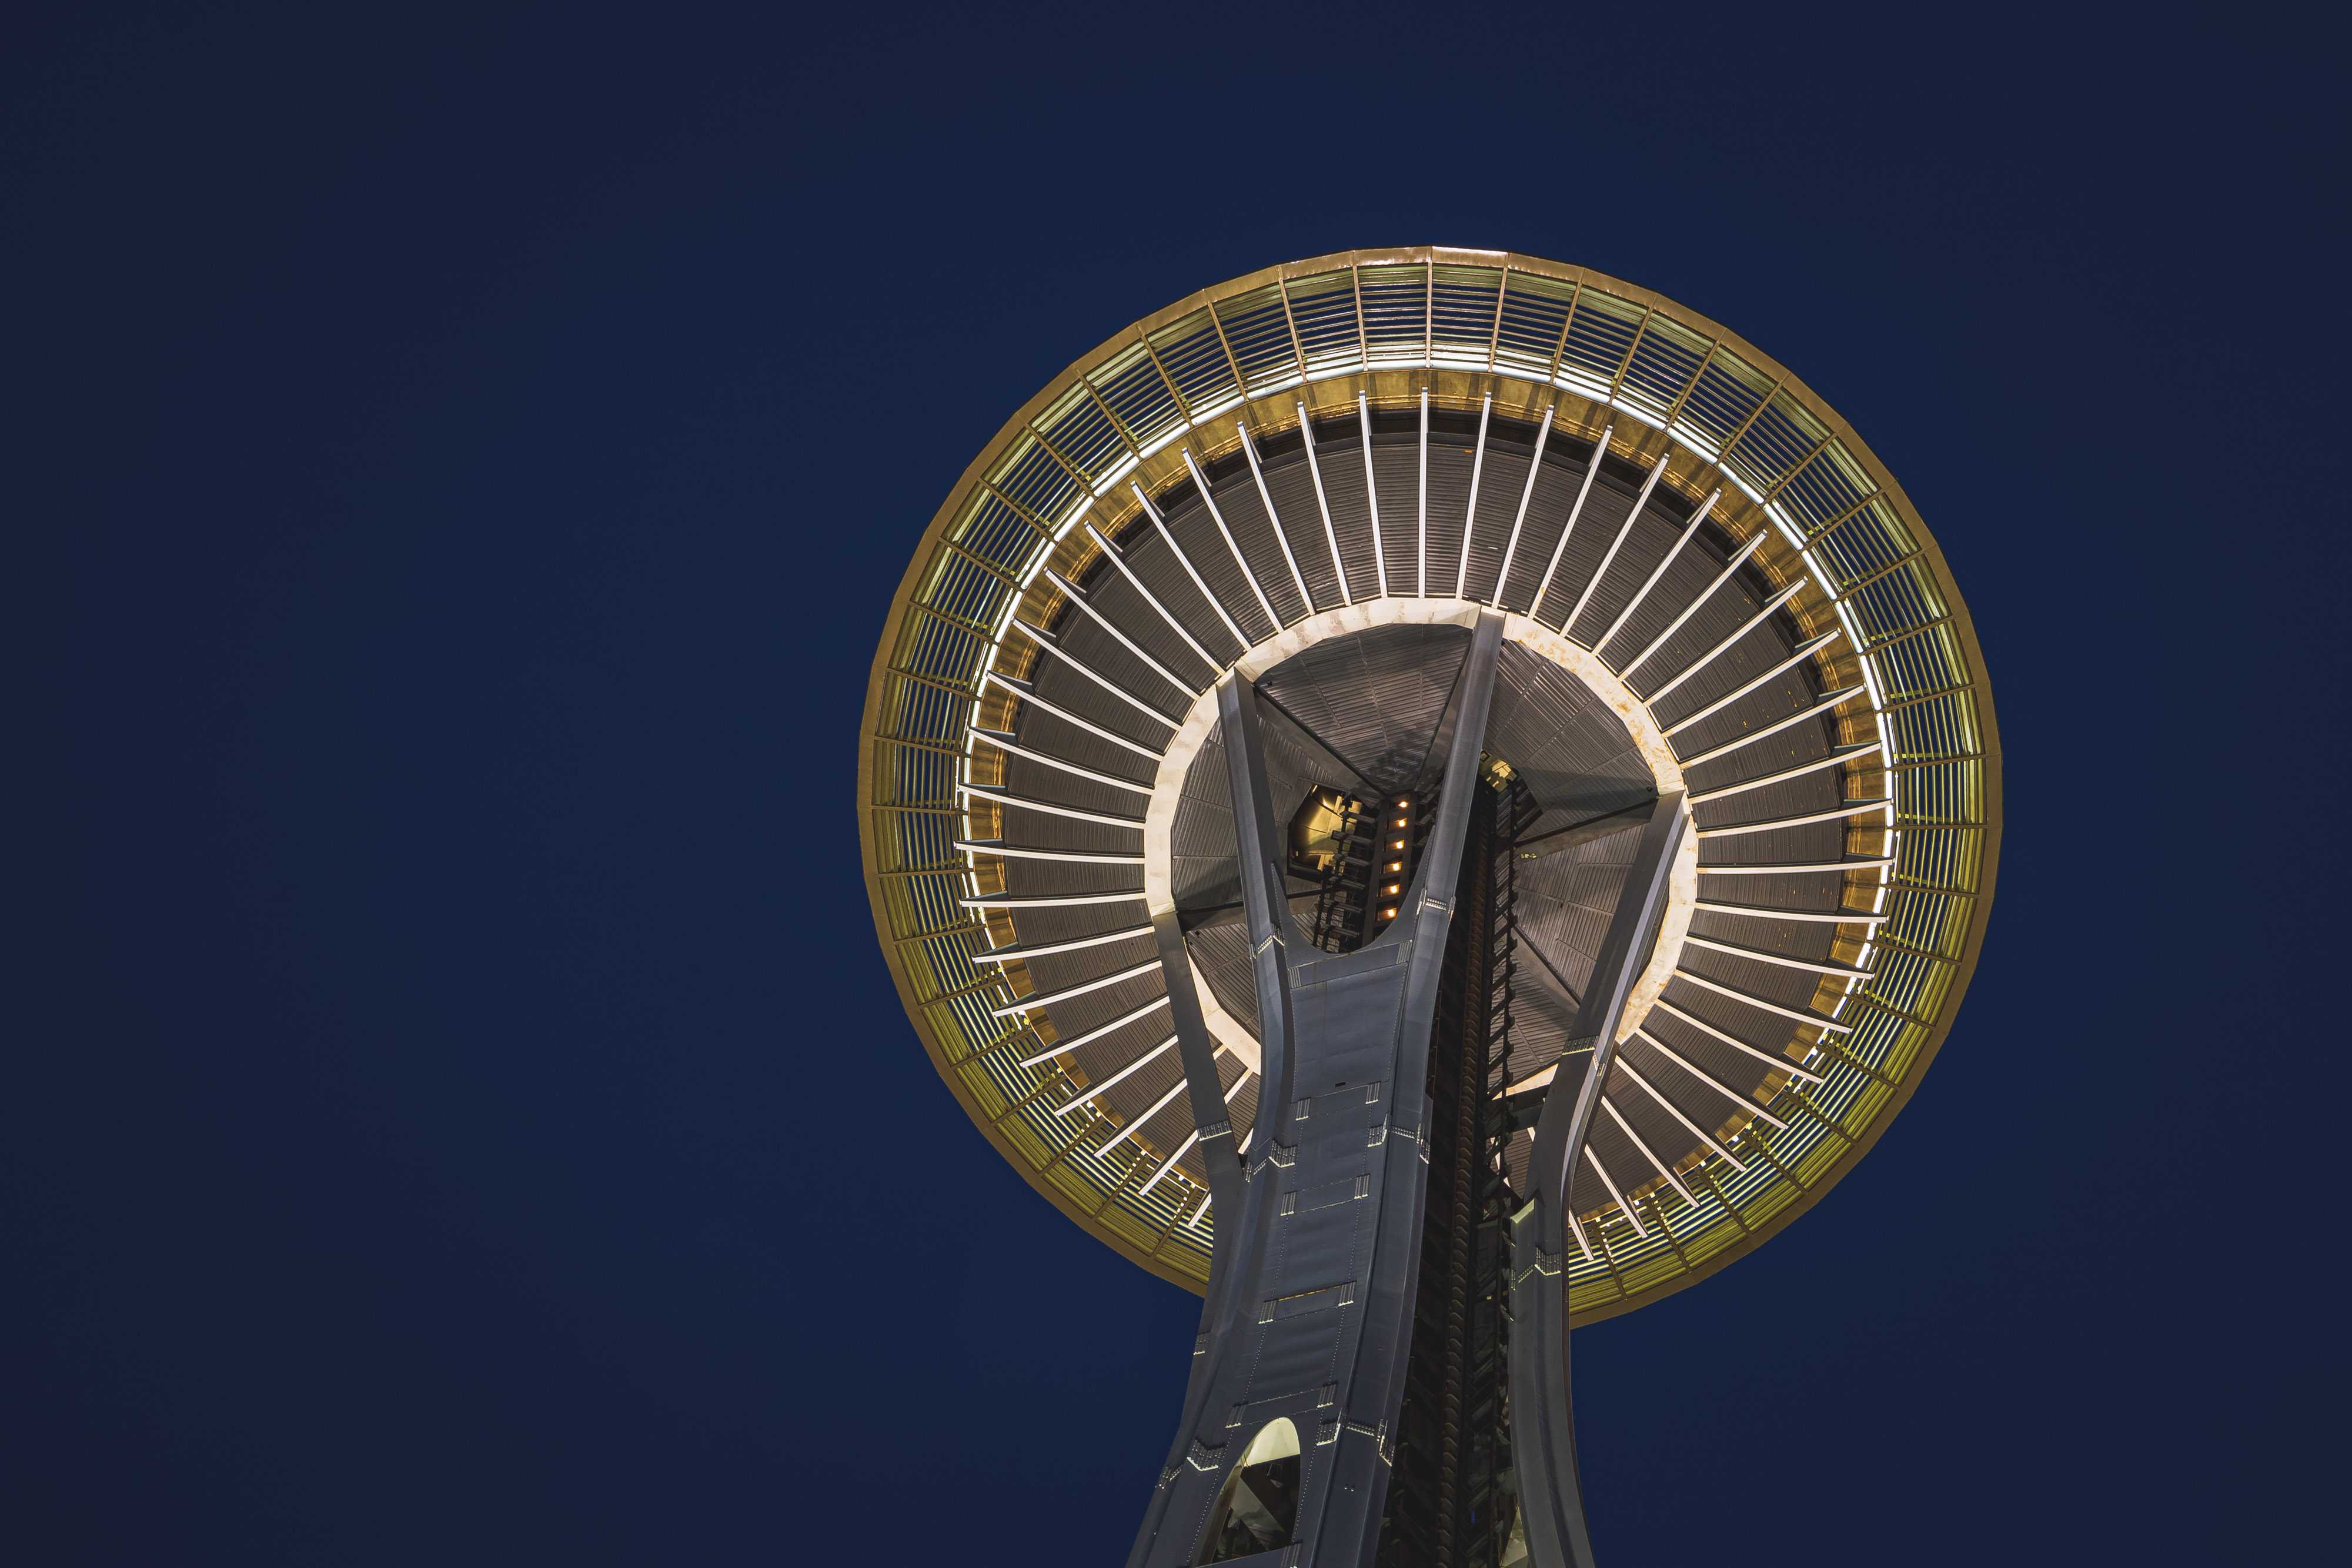 A view from underneath the Space Needle in Seattle, showing its perfectly round flying-saucer upper deck high above the air against a dark blue sky as first light breaks